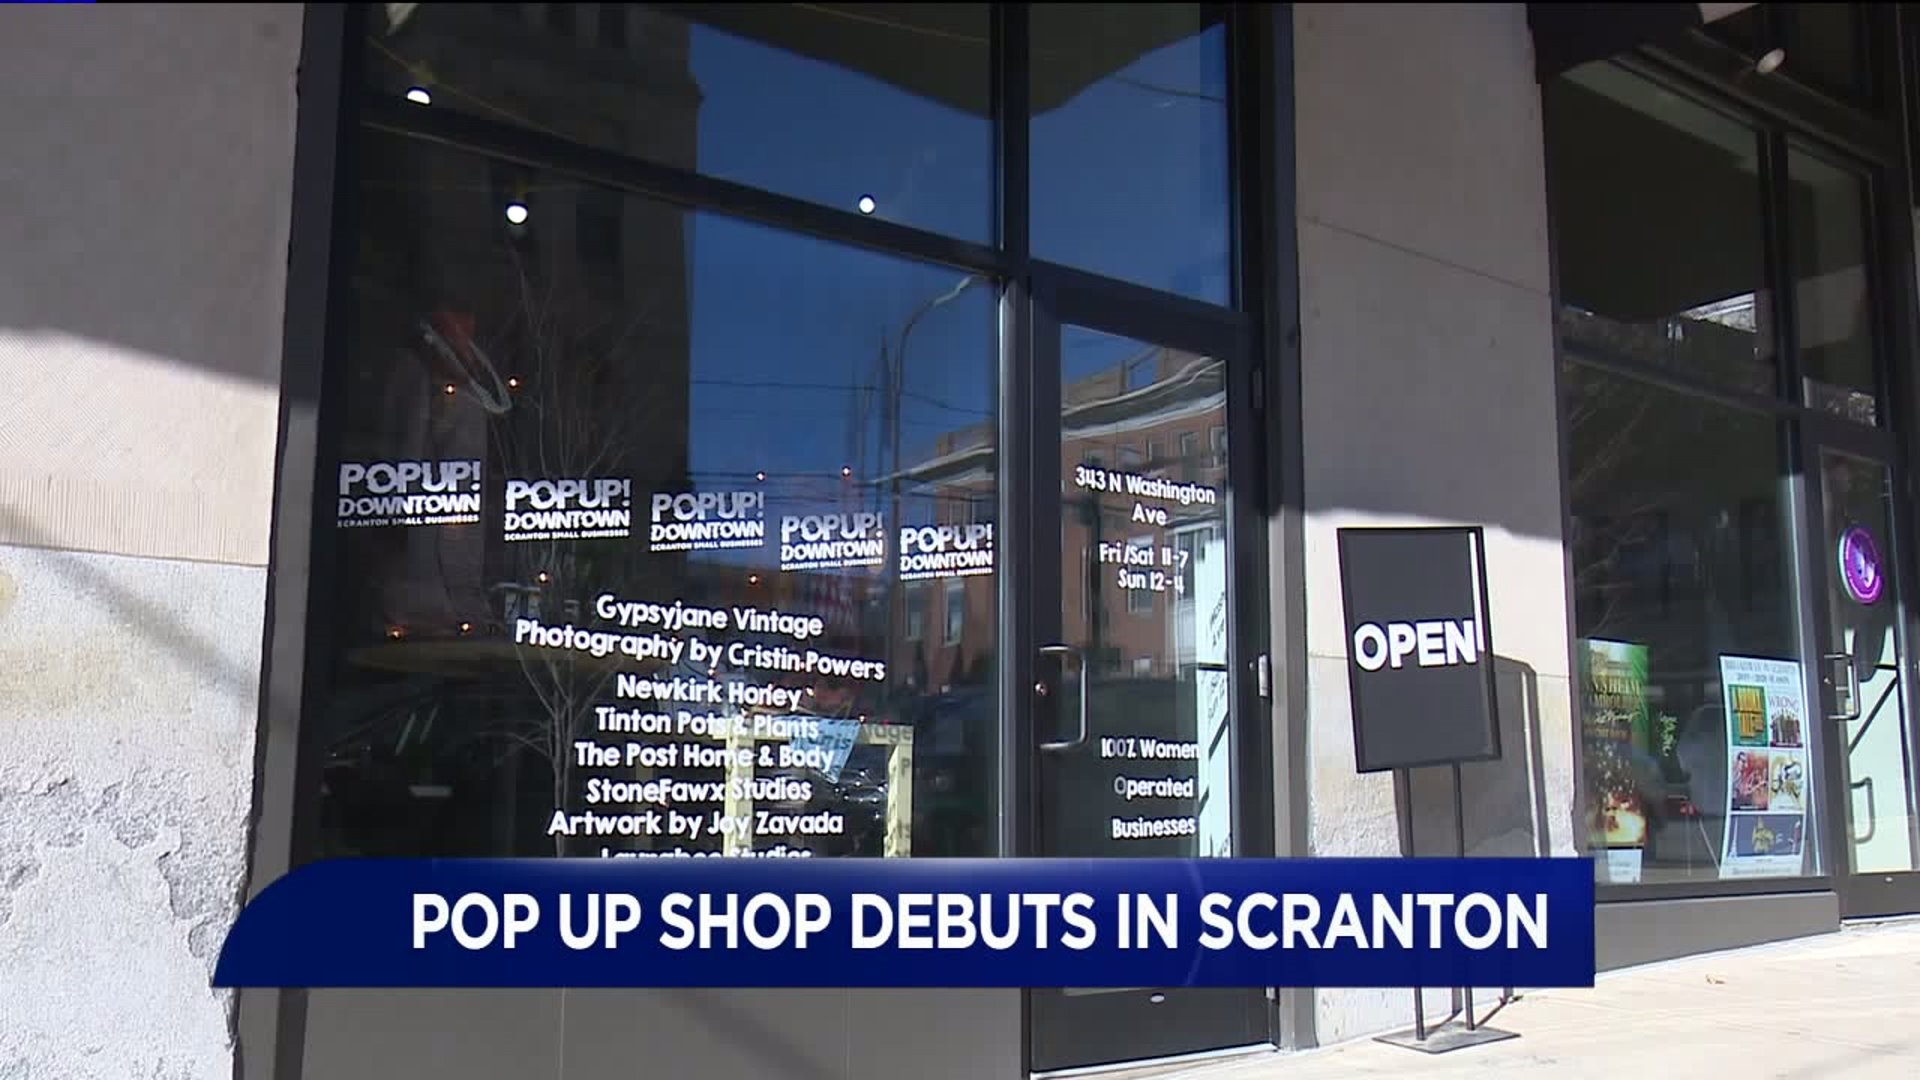 Pop Up Shop Debuts in the Electric City